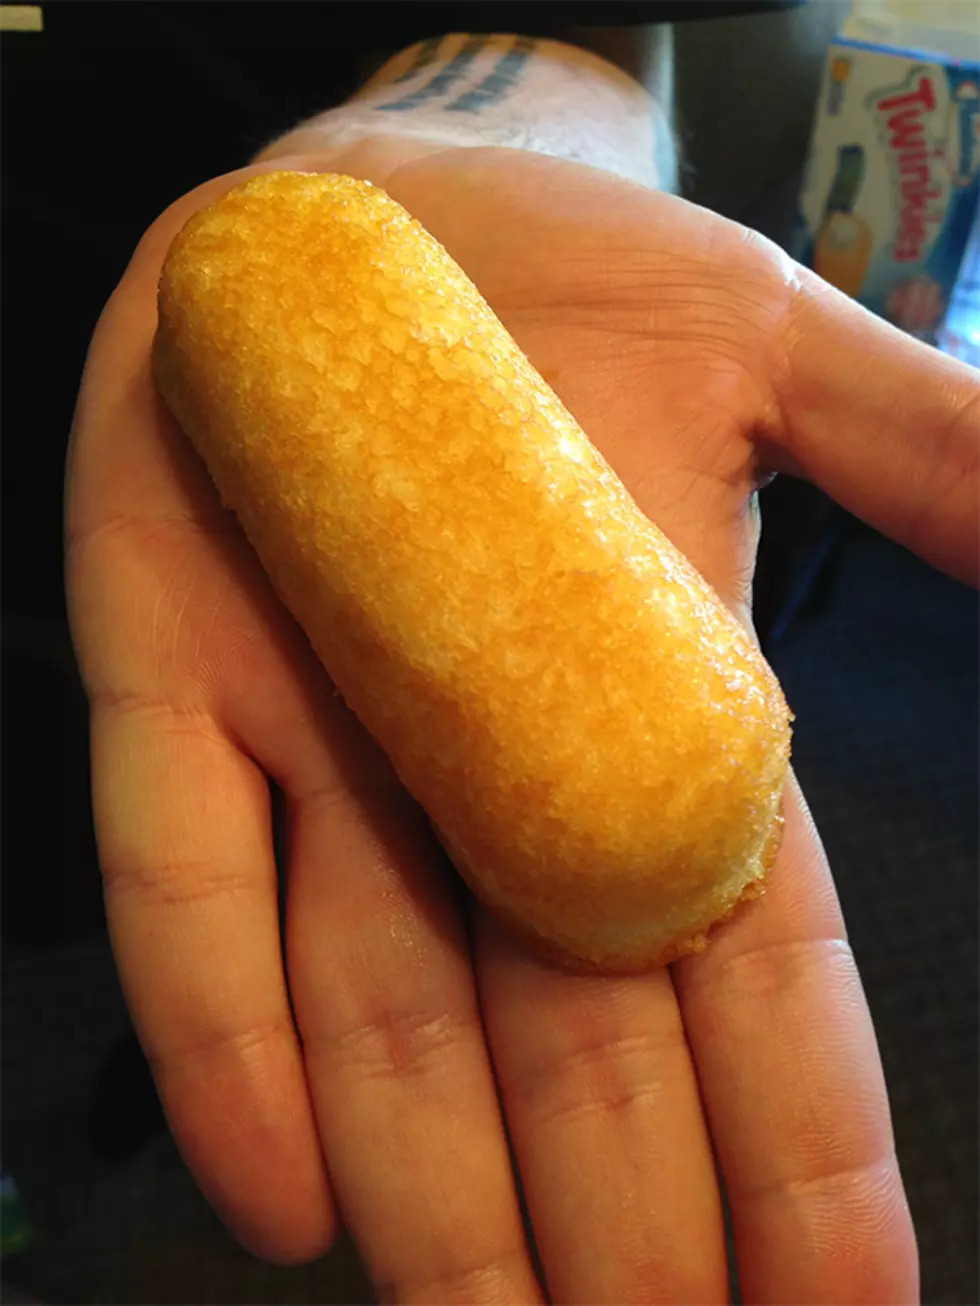 Twinkies are Back on Store Shelves